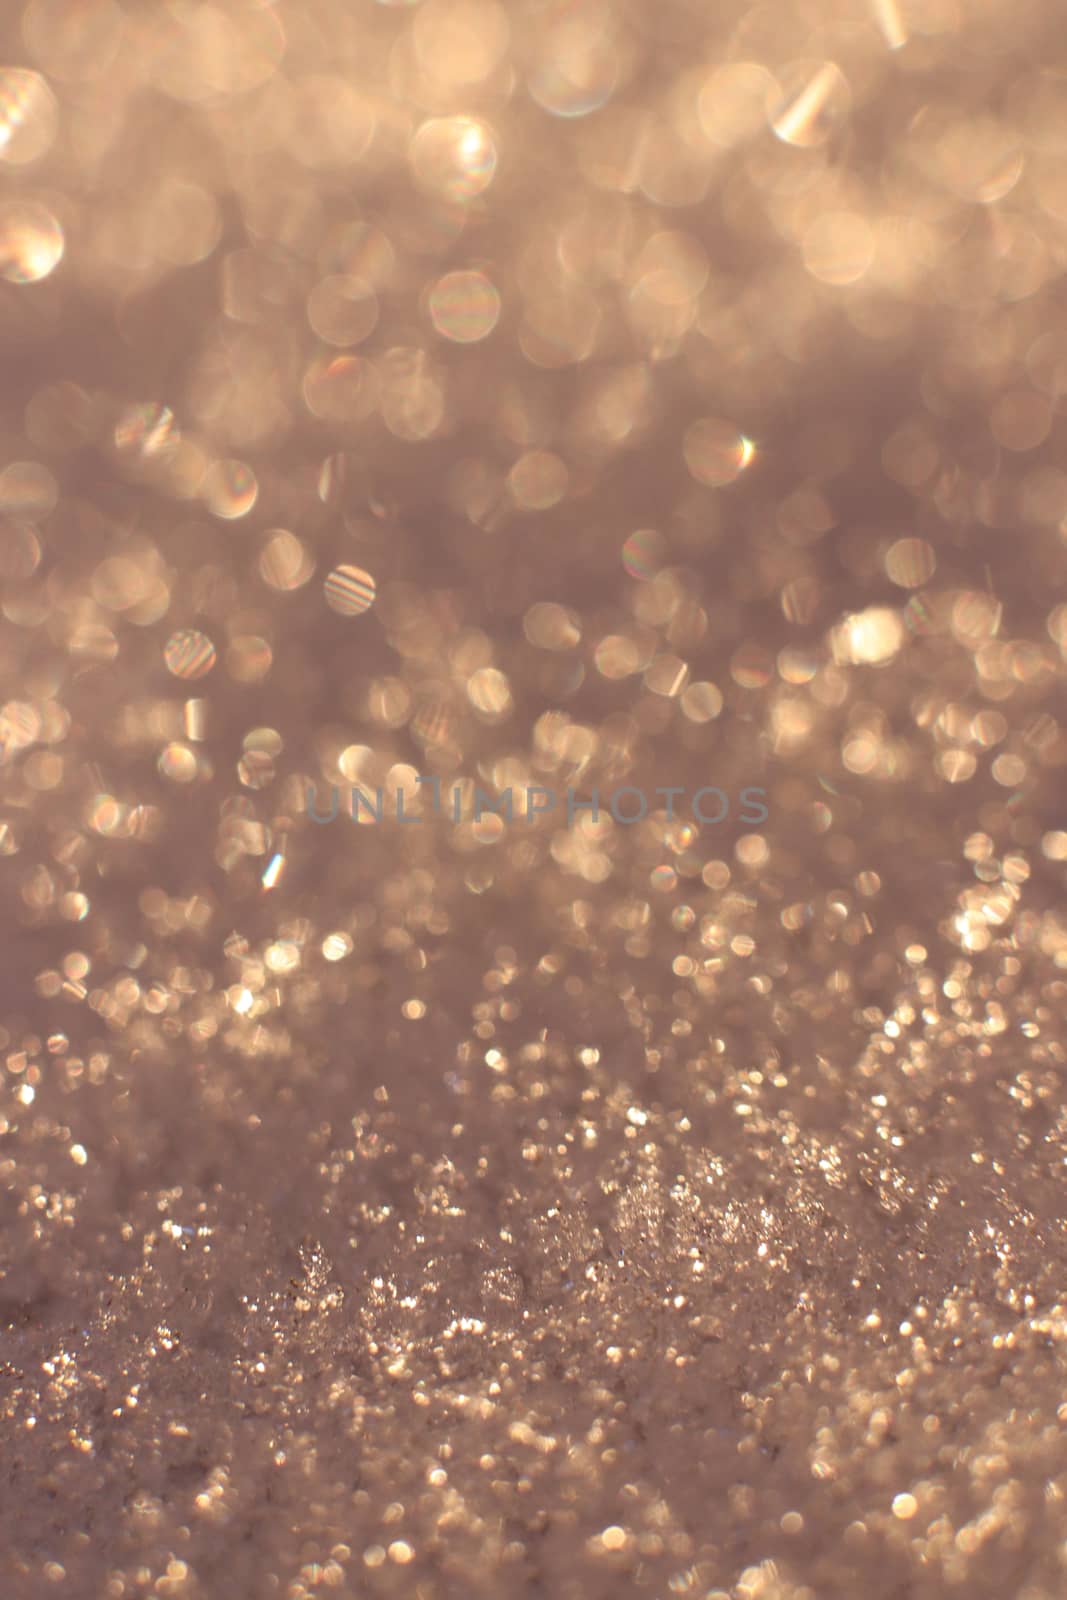 Snow Surface Texture. Winter Backdrop. Blurred Christmas Glitter Background. by sanches812